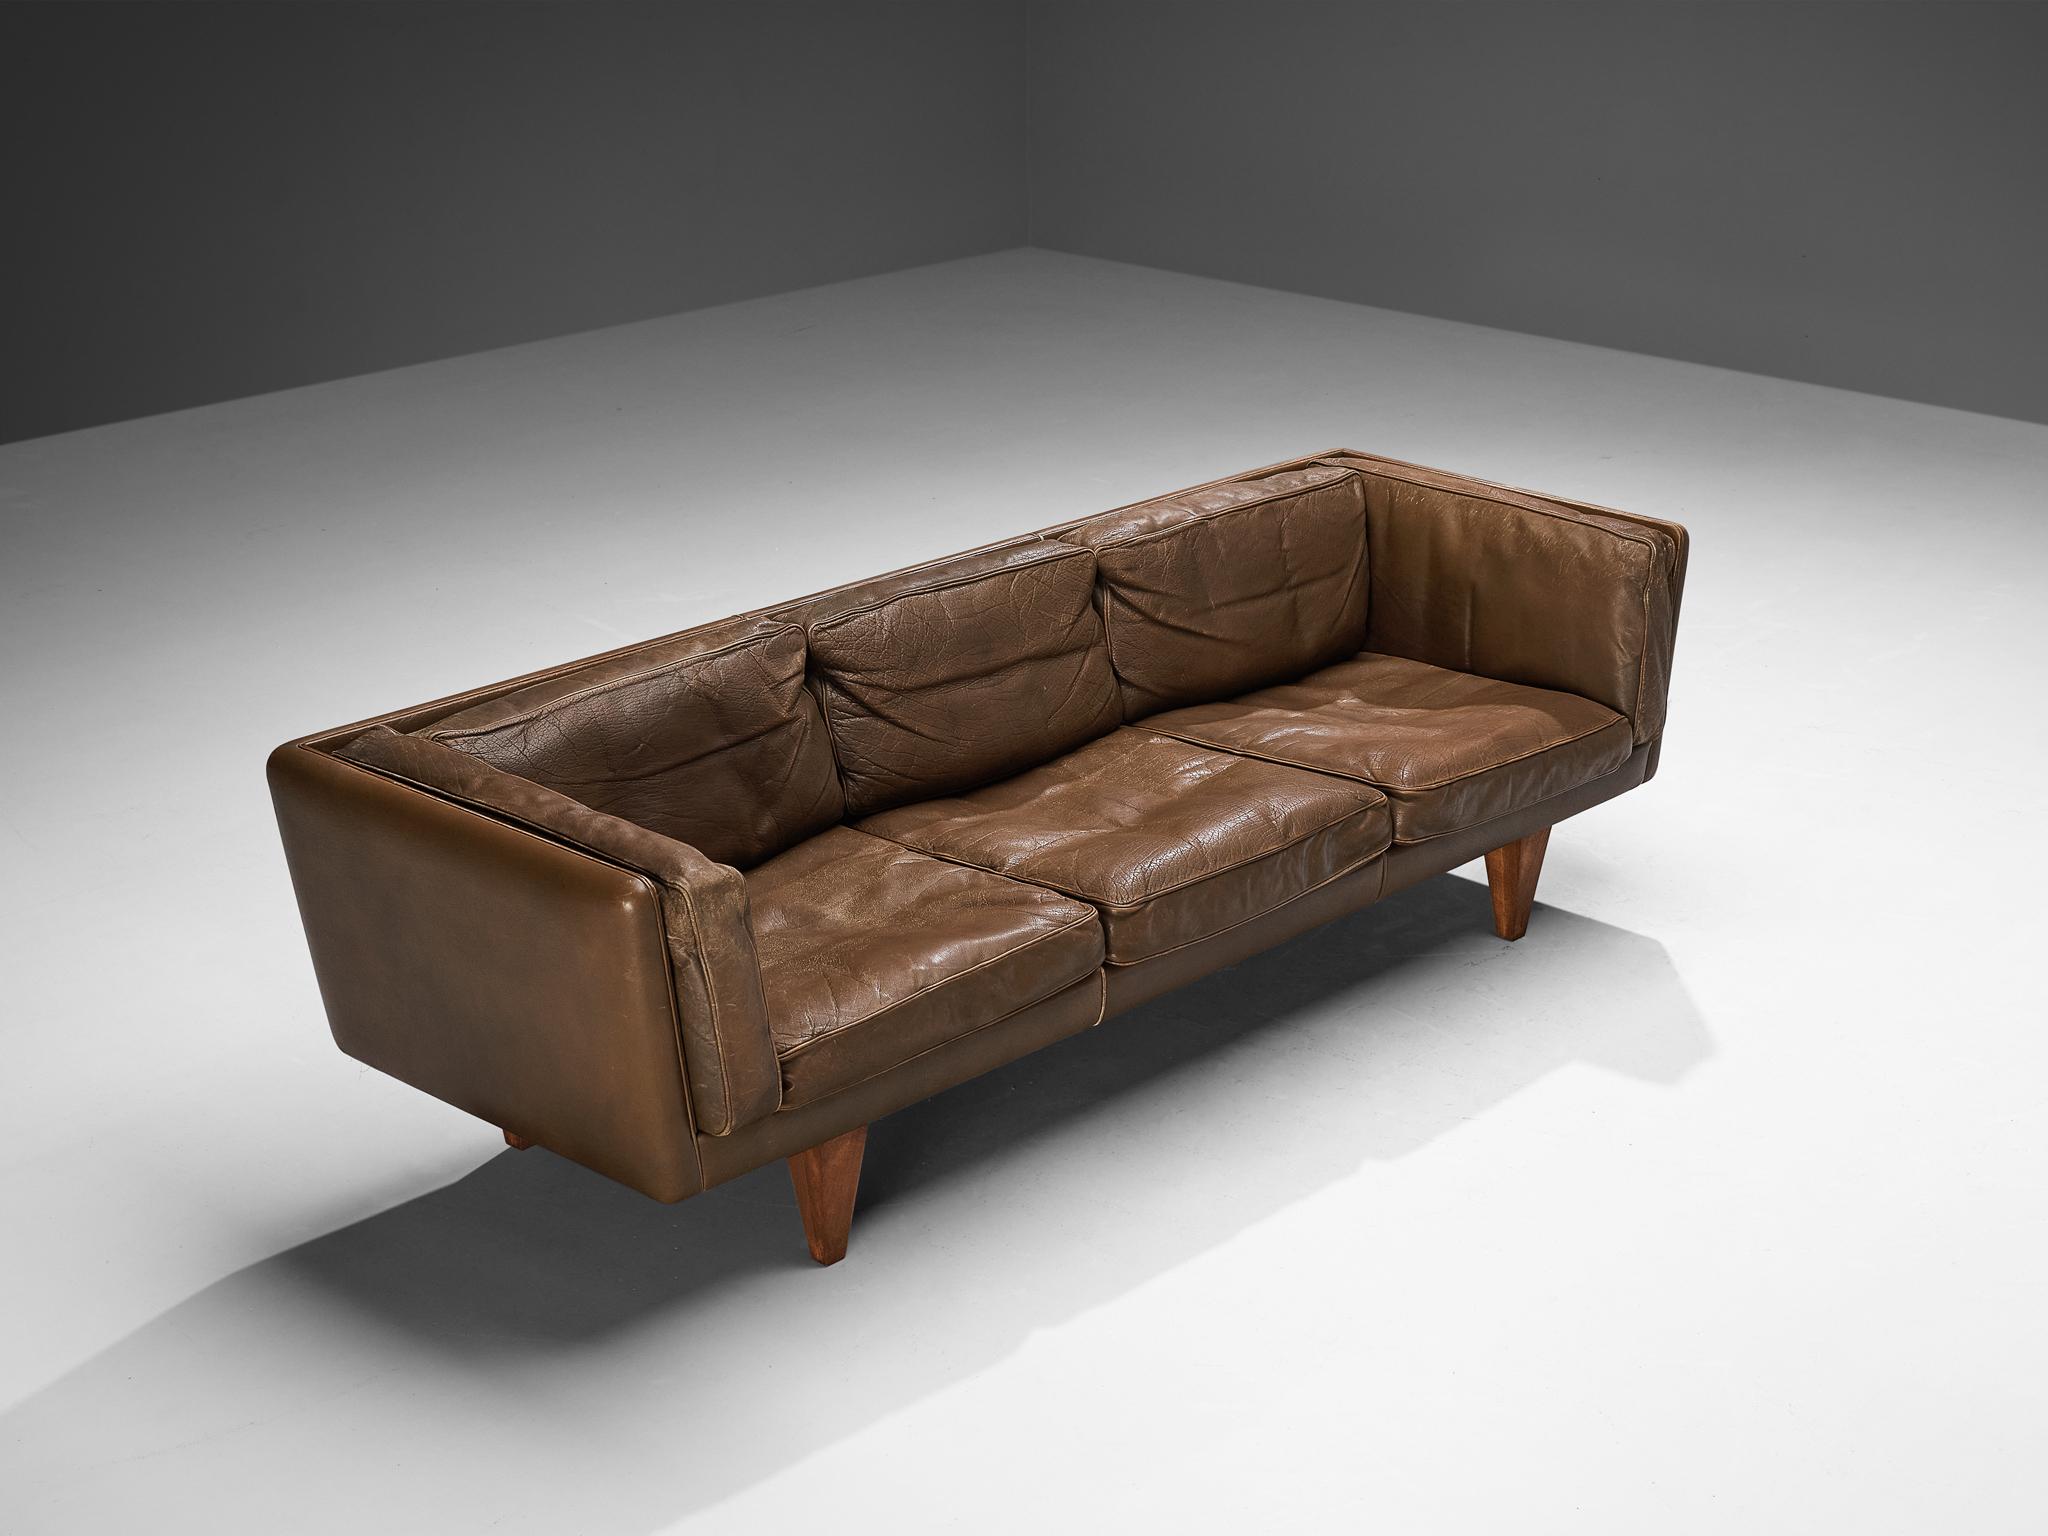 Illum Wikkelsø, sofa, model 'V11', leather, oak, Denmark, 1960s

This modern sofa is designed by Illum Wikkelsø and is marked by a clear open layout and the use of neutral materials. Defined by simplicity, clarity and absence of ornamentation, this